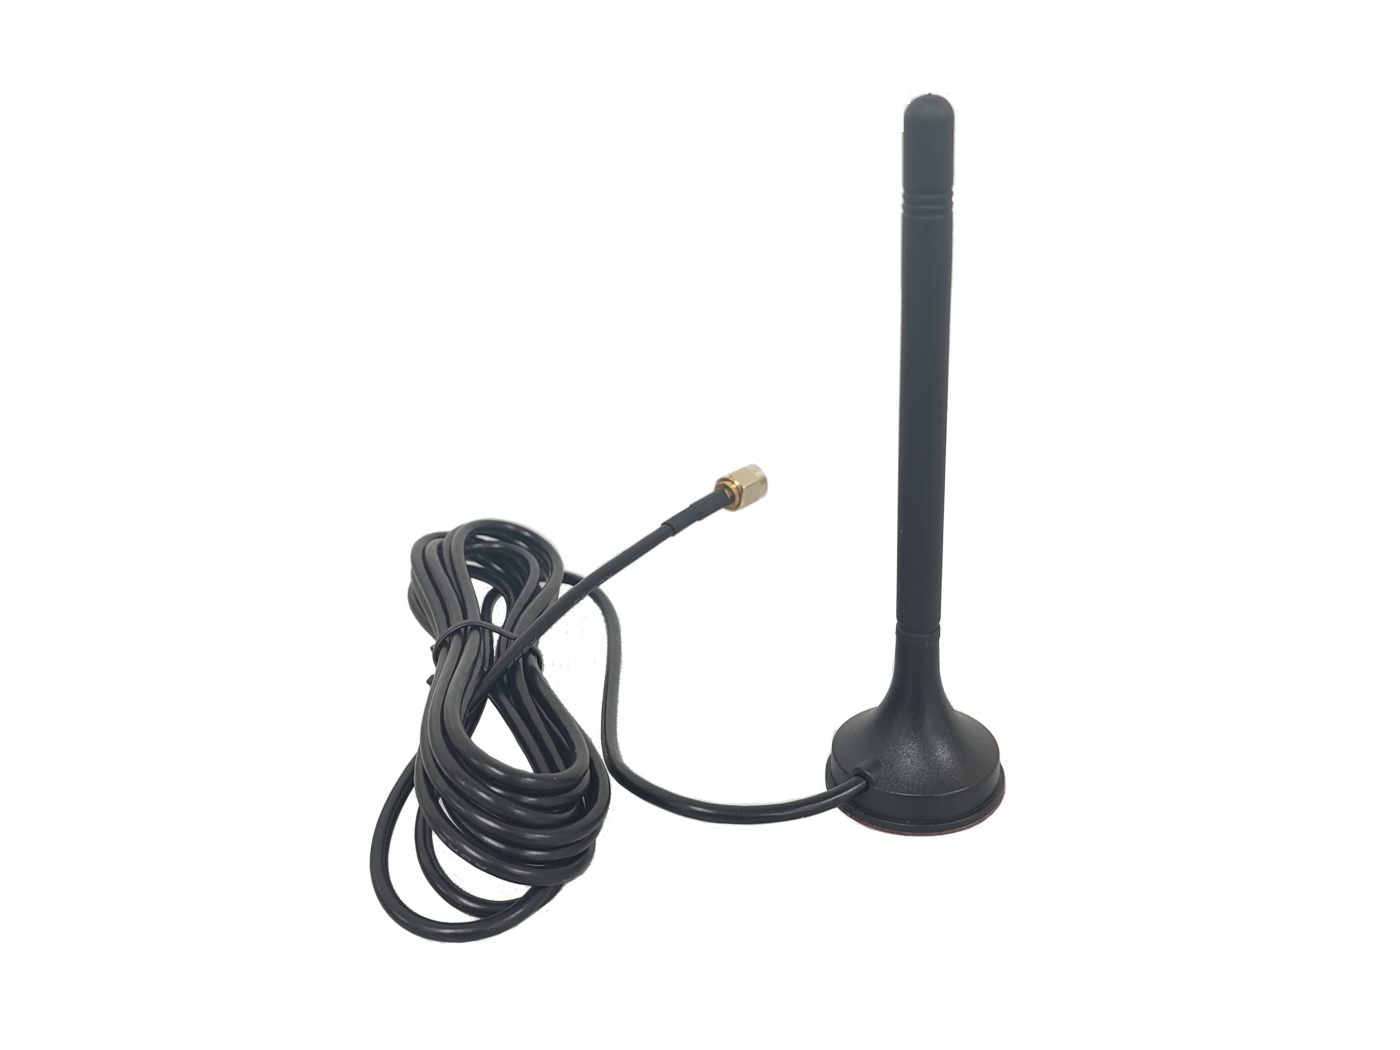 Antenna with suction technology USA leader in cap APsystems global | (SUPPLY) - MLPE multi-platform The